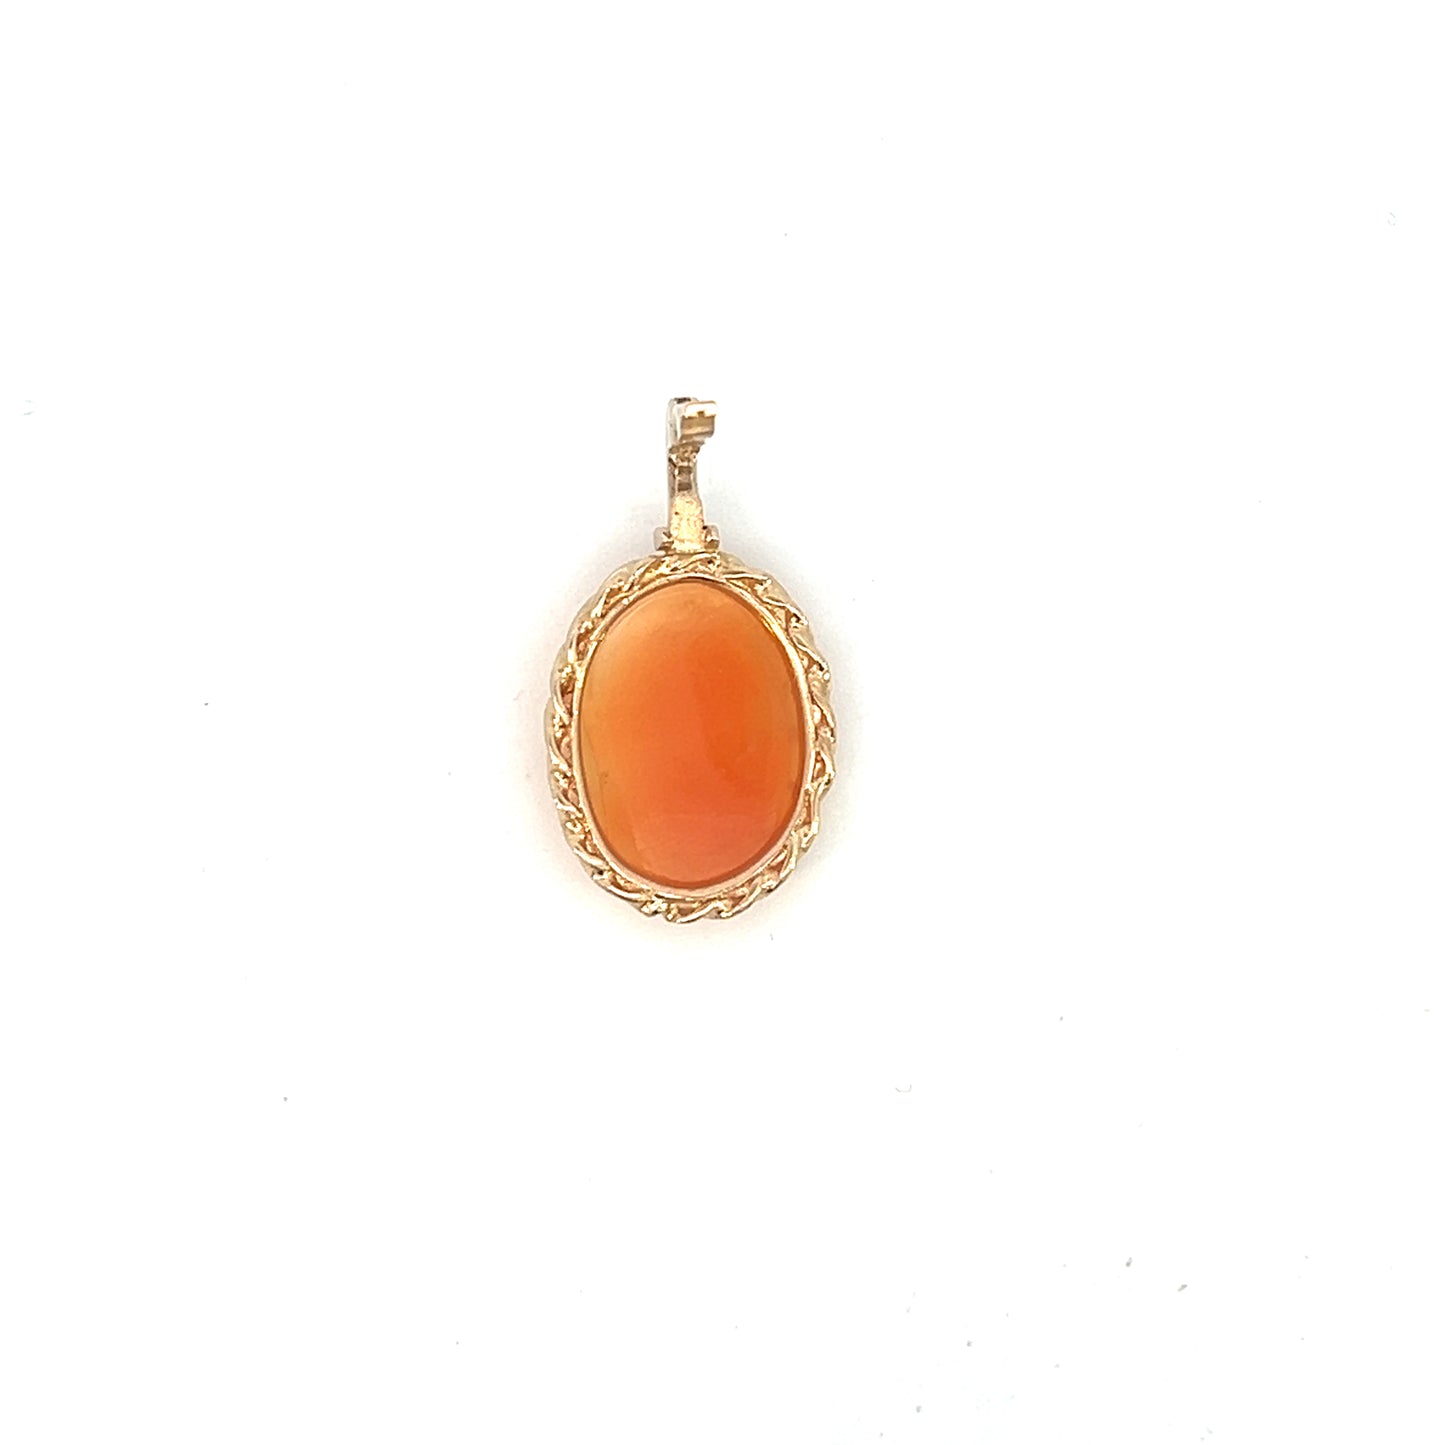 Antique Cameo Pendant - 14k - Yellow Gold - Clip-on Clasp